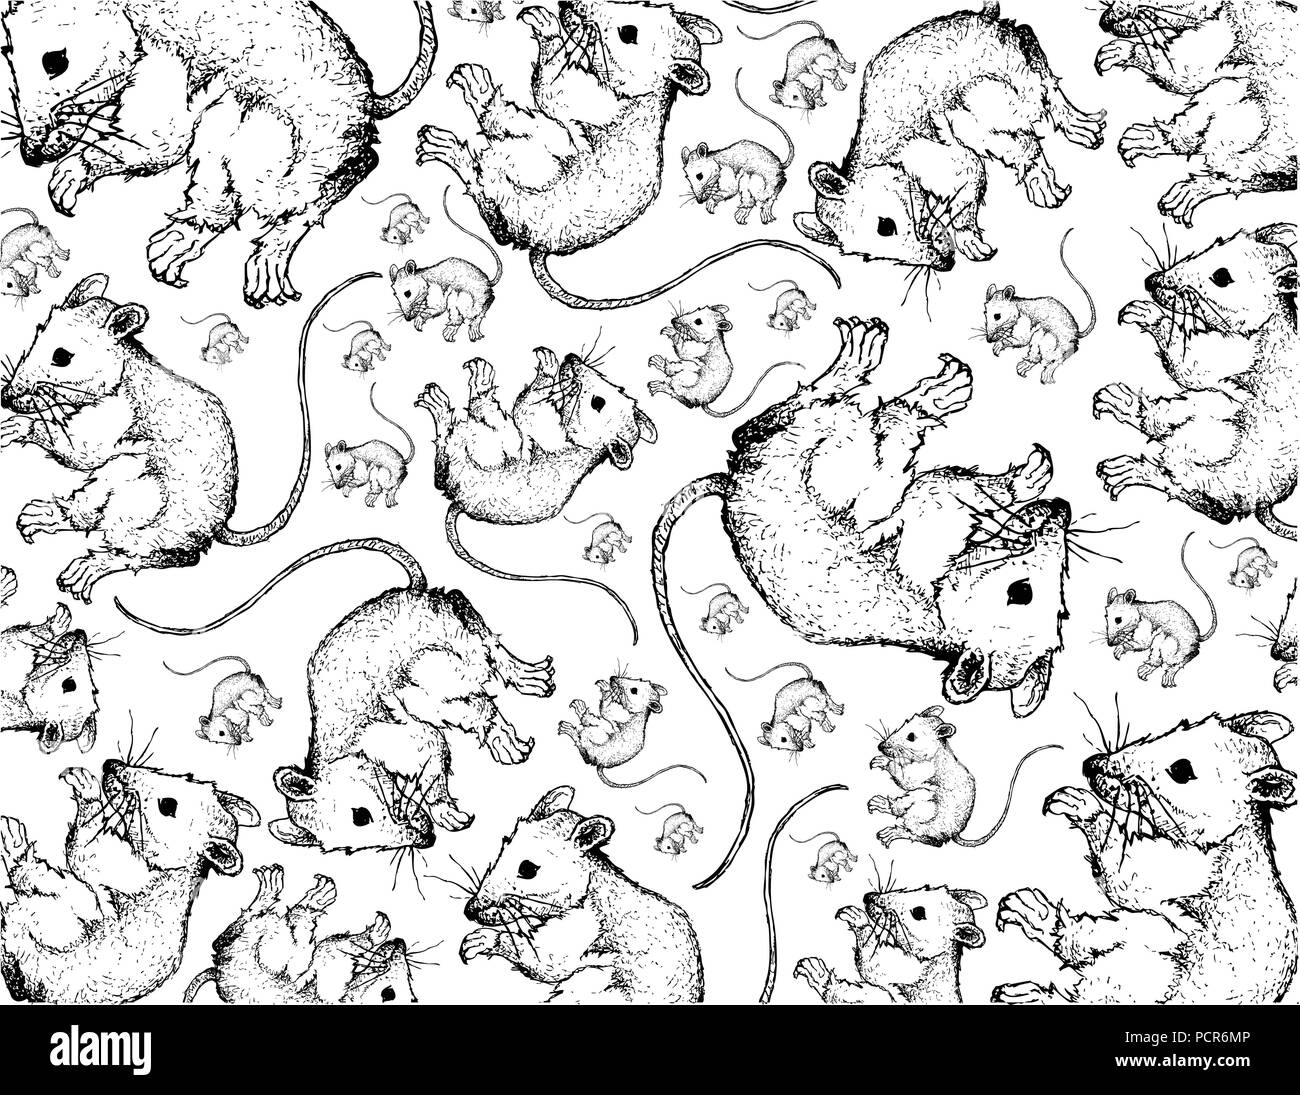 Autumn Animal, Illustration Wallpaper Background of Hand Drawn of Field Mices. Symbolic Animal to Show The Signs of Autumn Season. Stock Vector